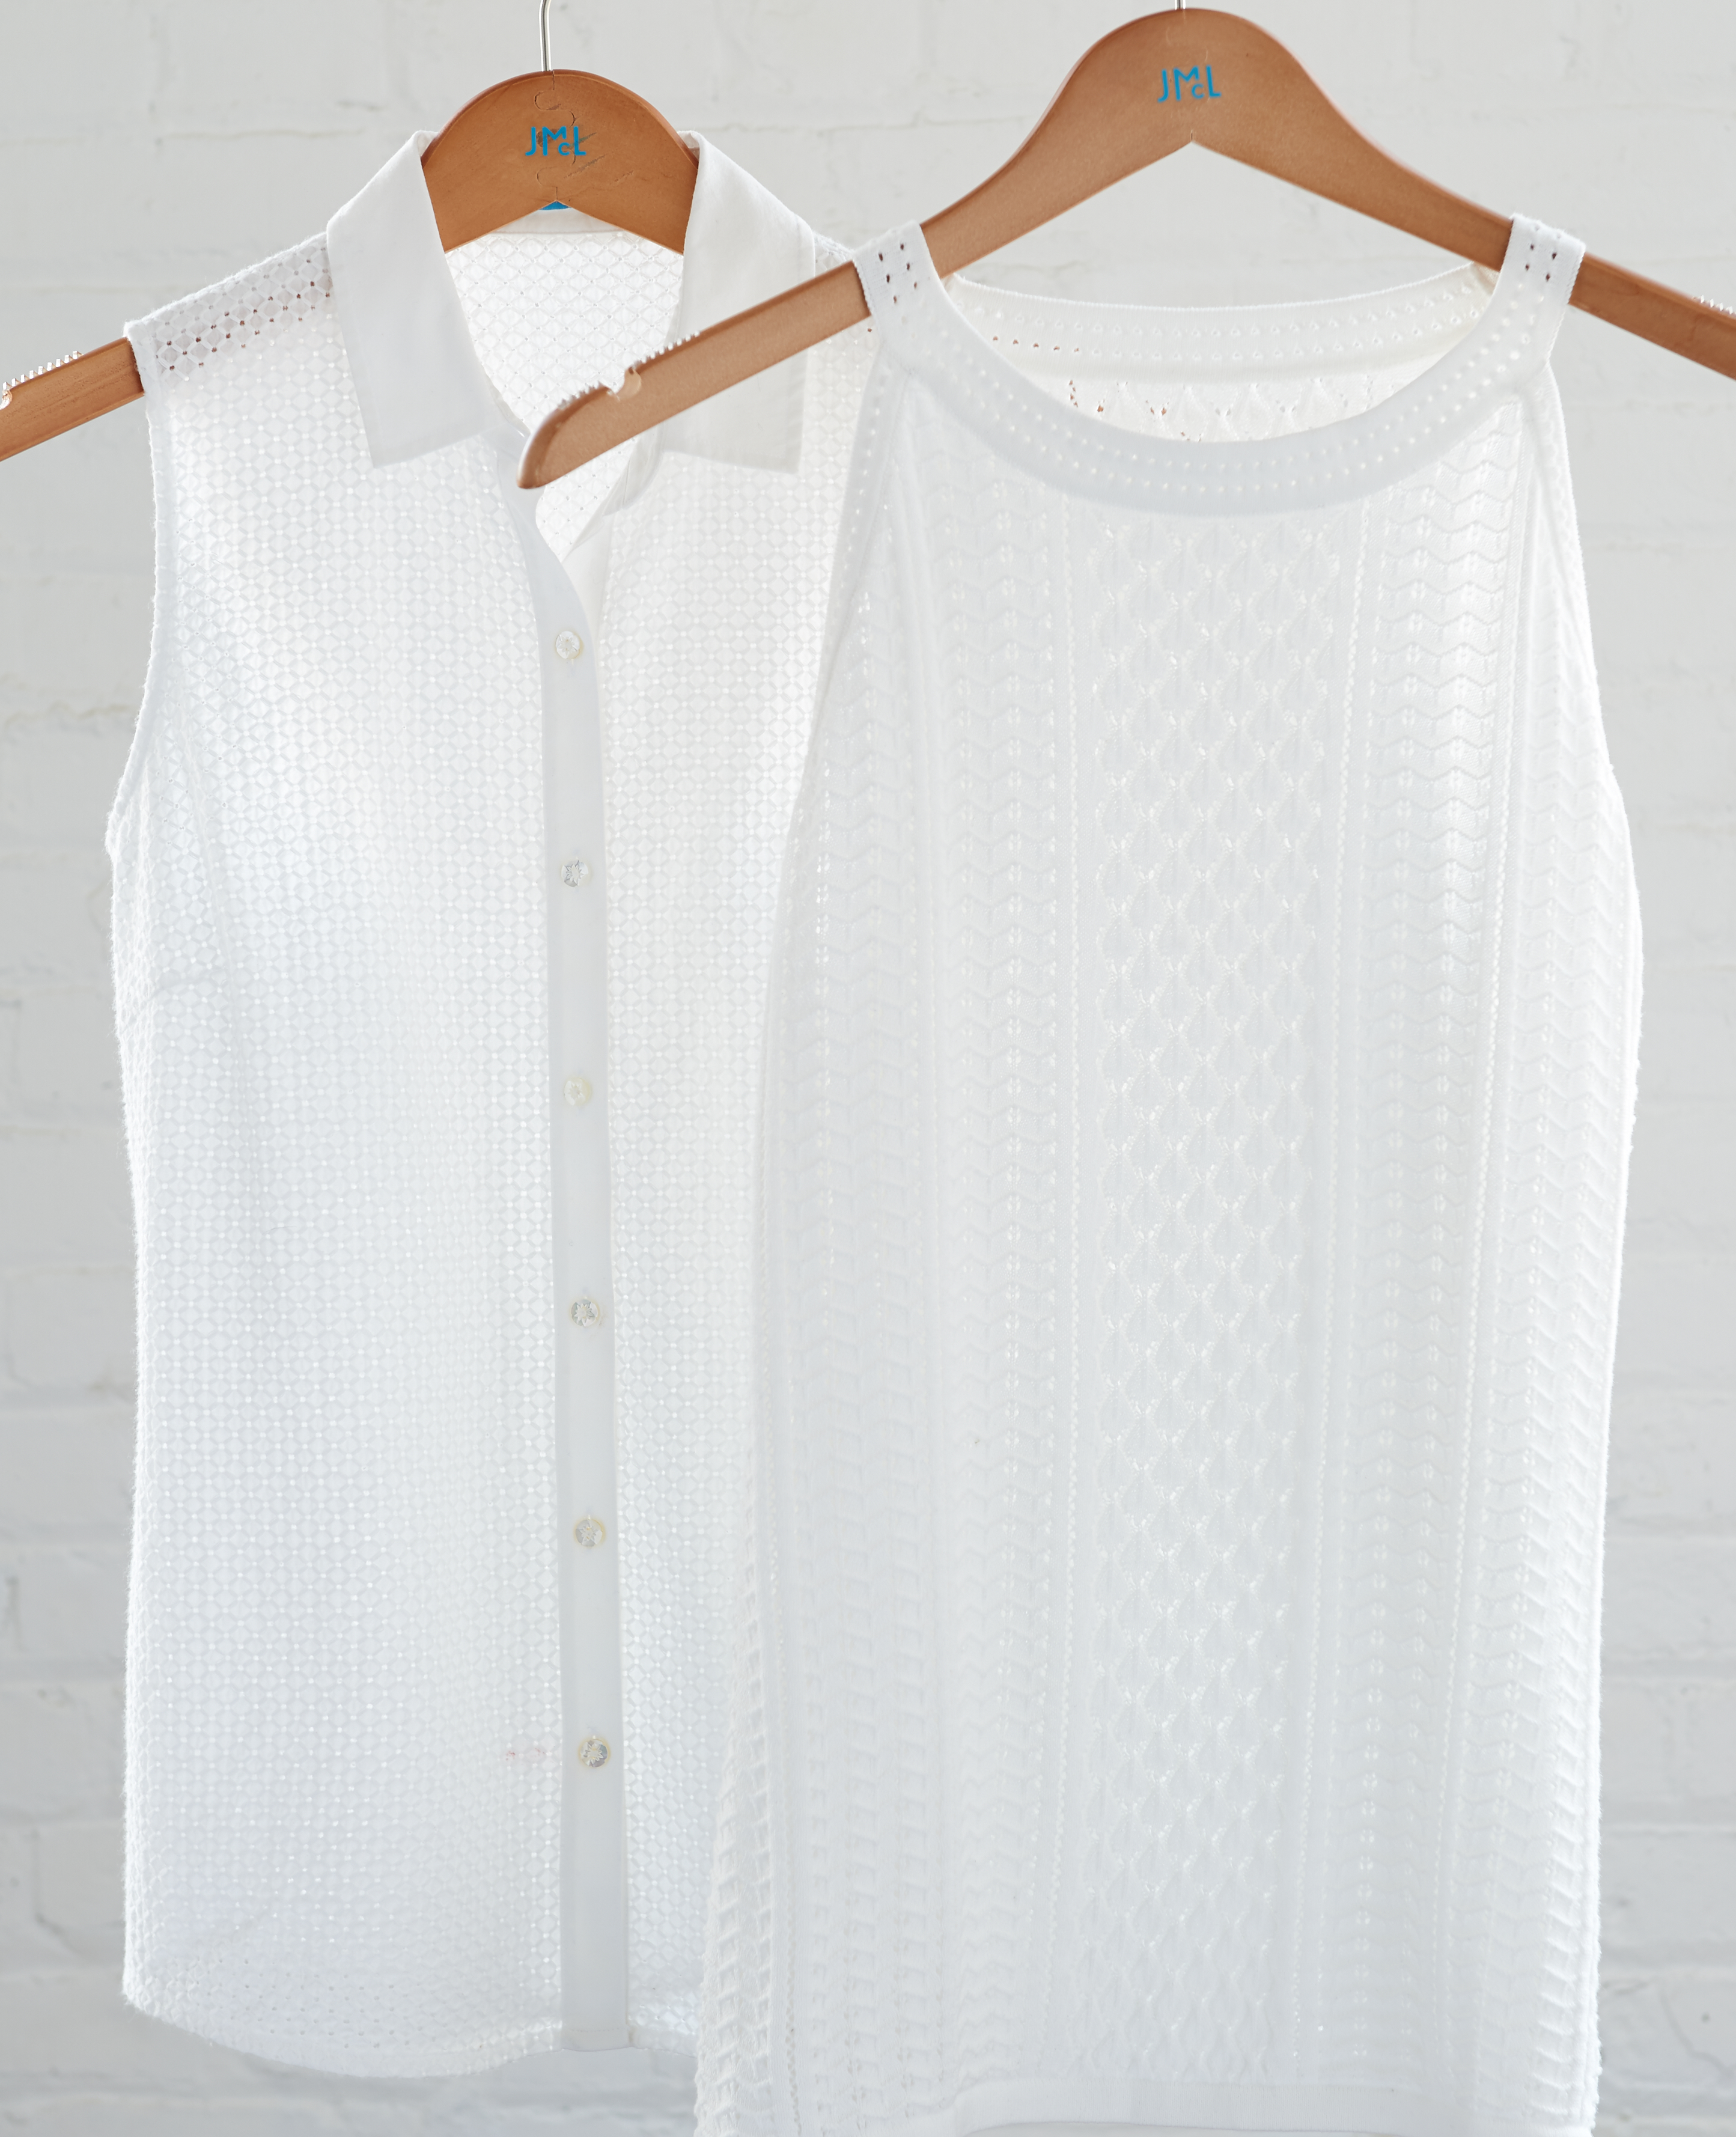 Two White Shirts on hangers with daylight by Alison Gootee Photography 